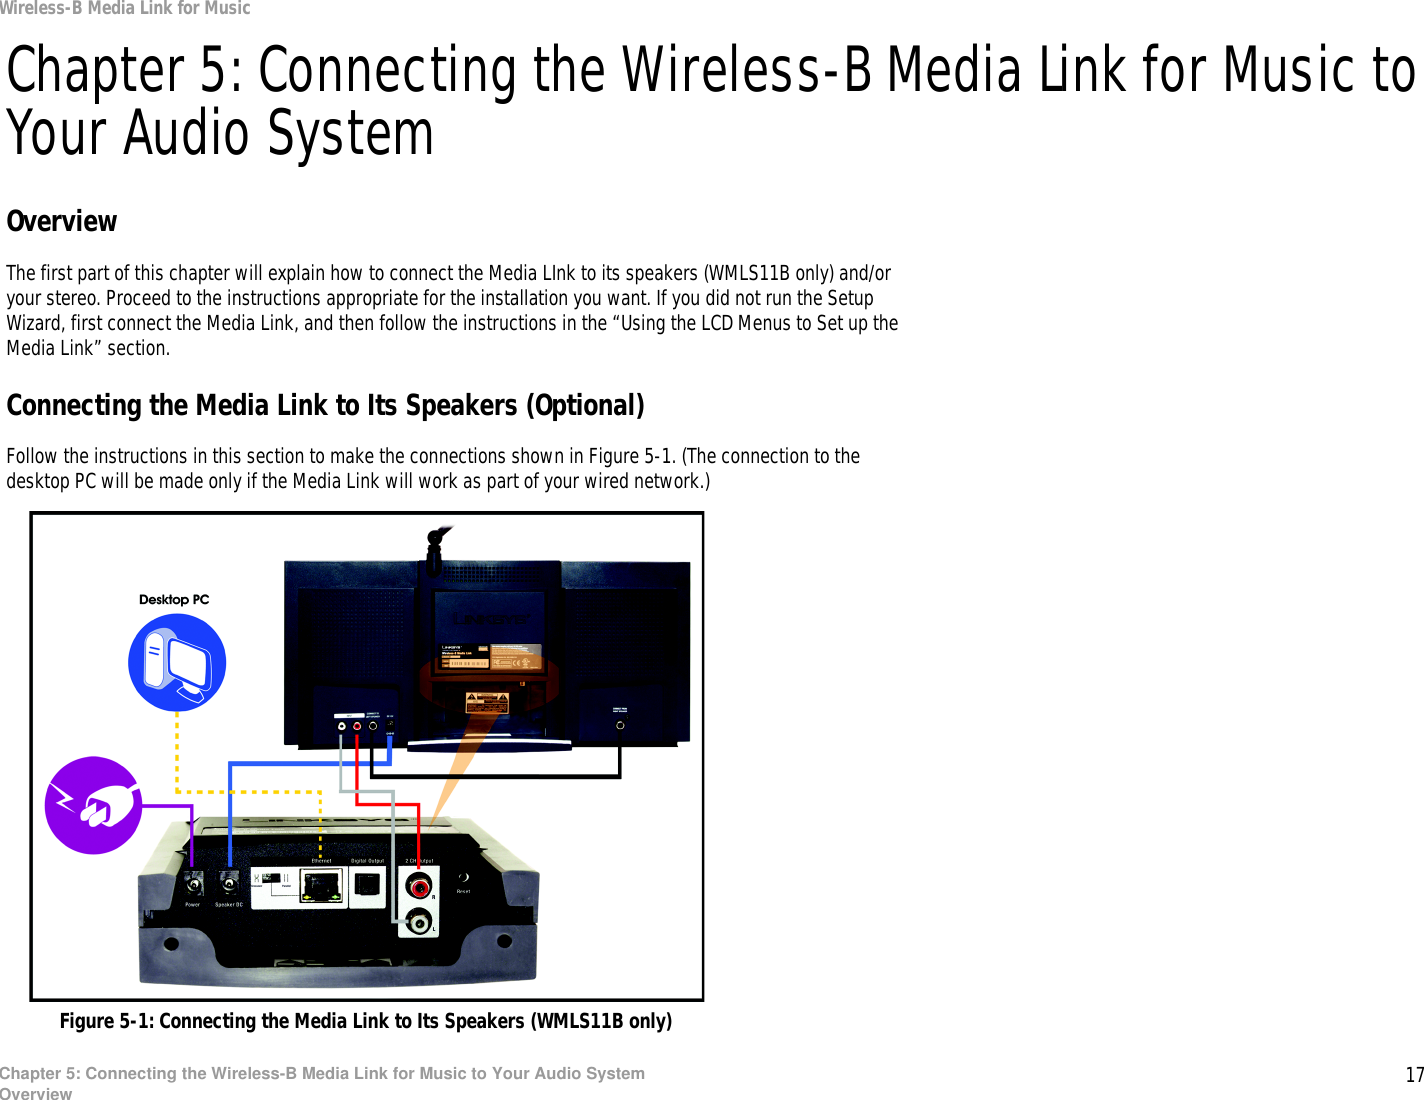 17Chapter 5: Connecting the Wireless-B Media Link for Music to Your Audio SystemOverviewWireless-B Media Link for MusicChapter 5: Connecting the Wireless-B Media Link for Music to Your Audio SystemOverviewThe first part of this chapter will explain how to connect the Media LInk to its speakers (WMLS11B only) and/or your stereo. Proceed to the instructions appropriate for the installation you want. If you did not run the Setup Wizard, first connect the Media Link, and then follow the instructions in the “Using the LCD Menus to Set up the Media Link” section.Connecting the Media Link to Its Speakers (Optional)Follow the instructions in this section to make the connections shown in Figure 5-1. (The connection to the desktop PC will be made only if the Media Link will work as part of your wired network.)Figure 5-1: Connecting the Media Link to Its Speakers (WMLS11B only)